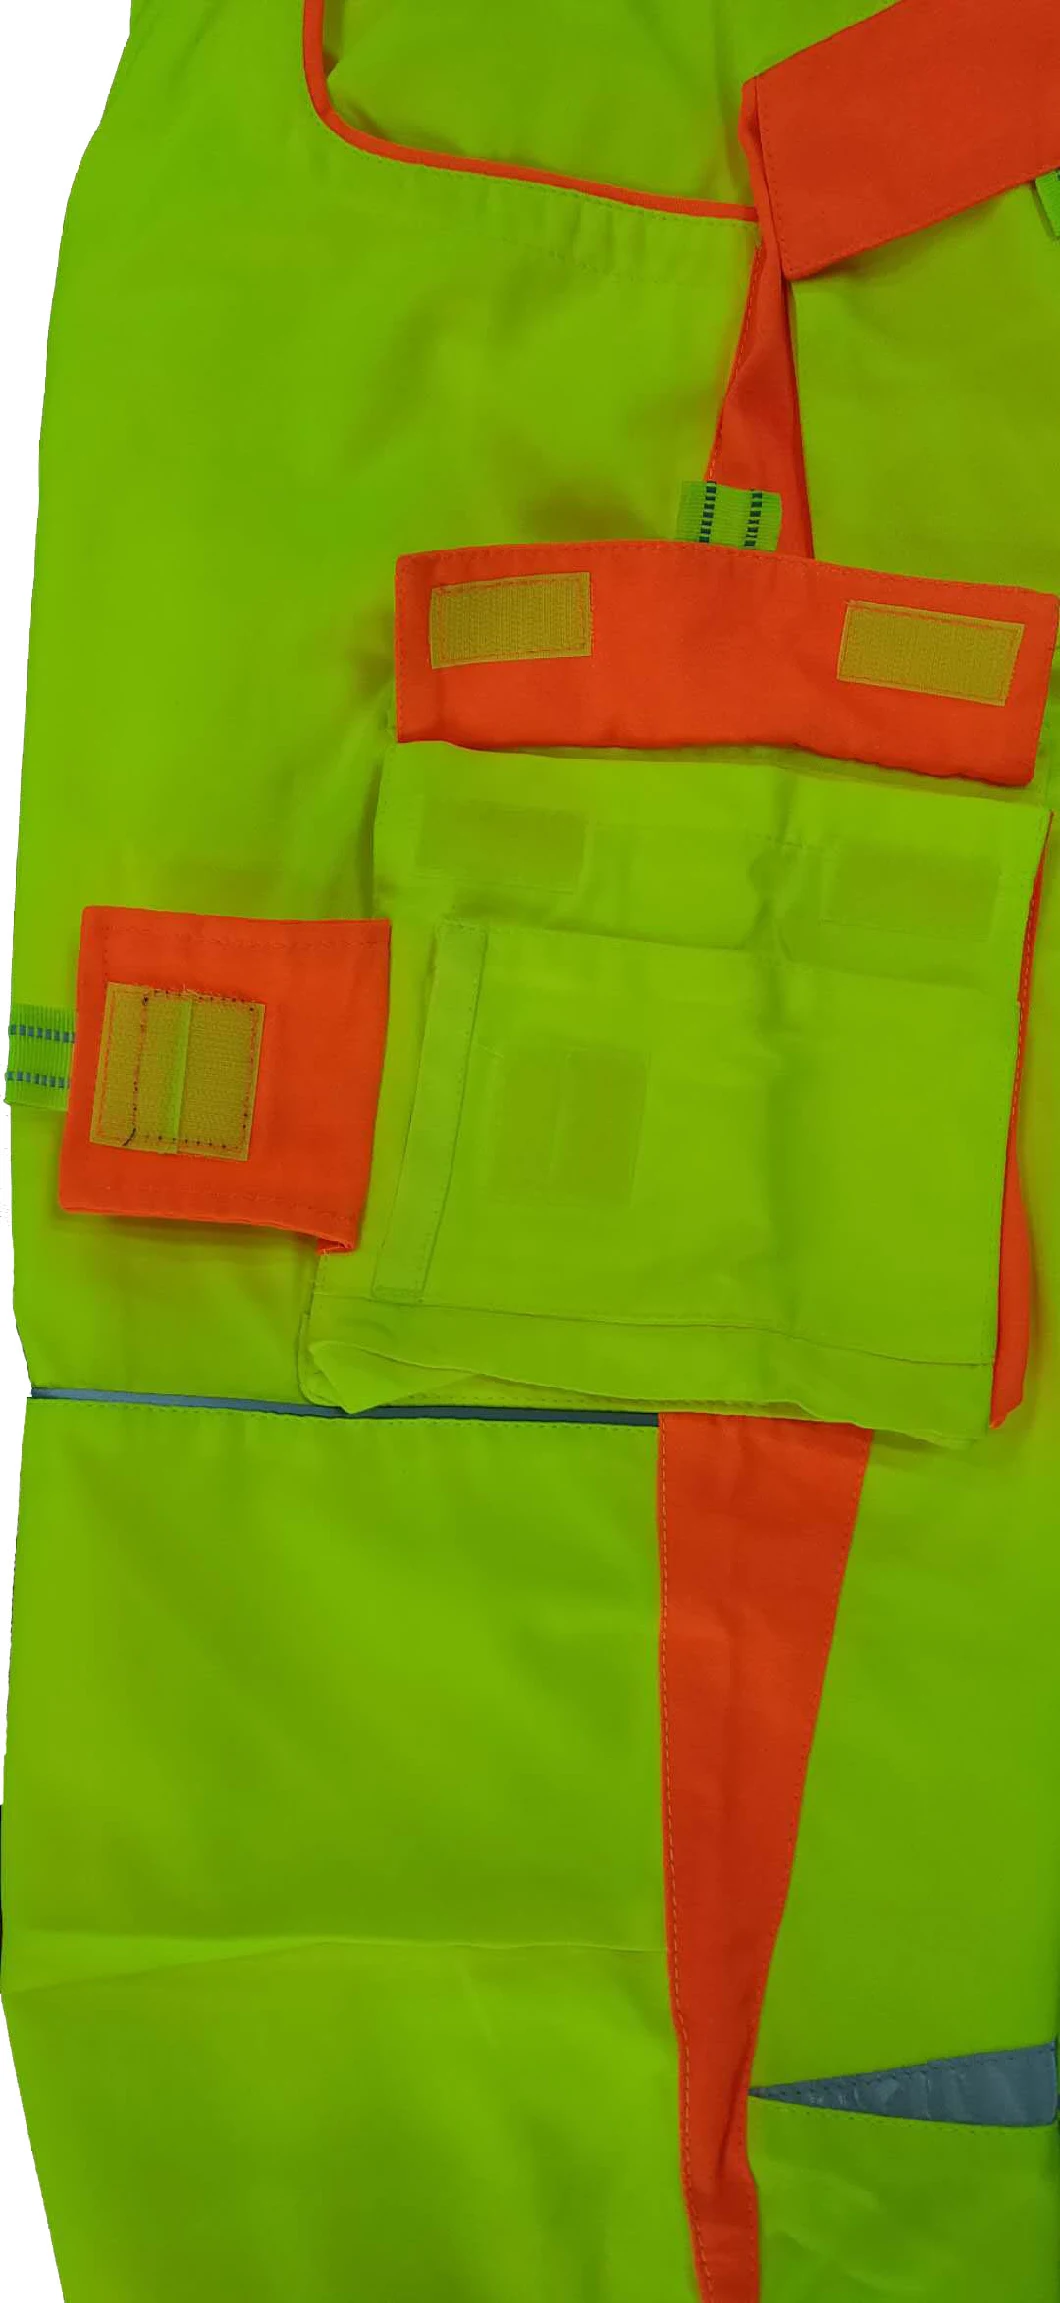 Men's High Visibility Safety Working Trousers